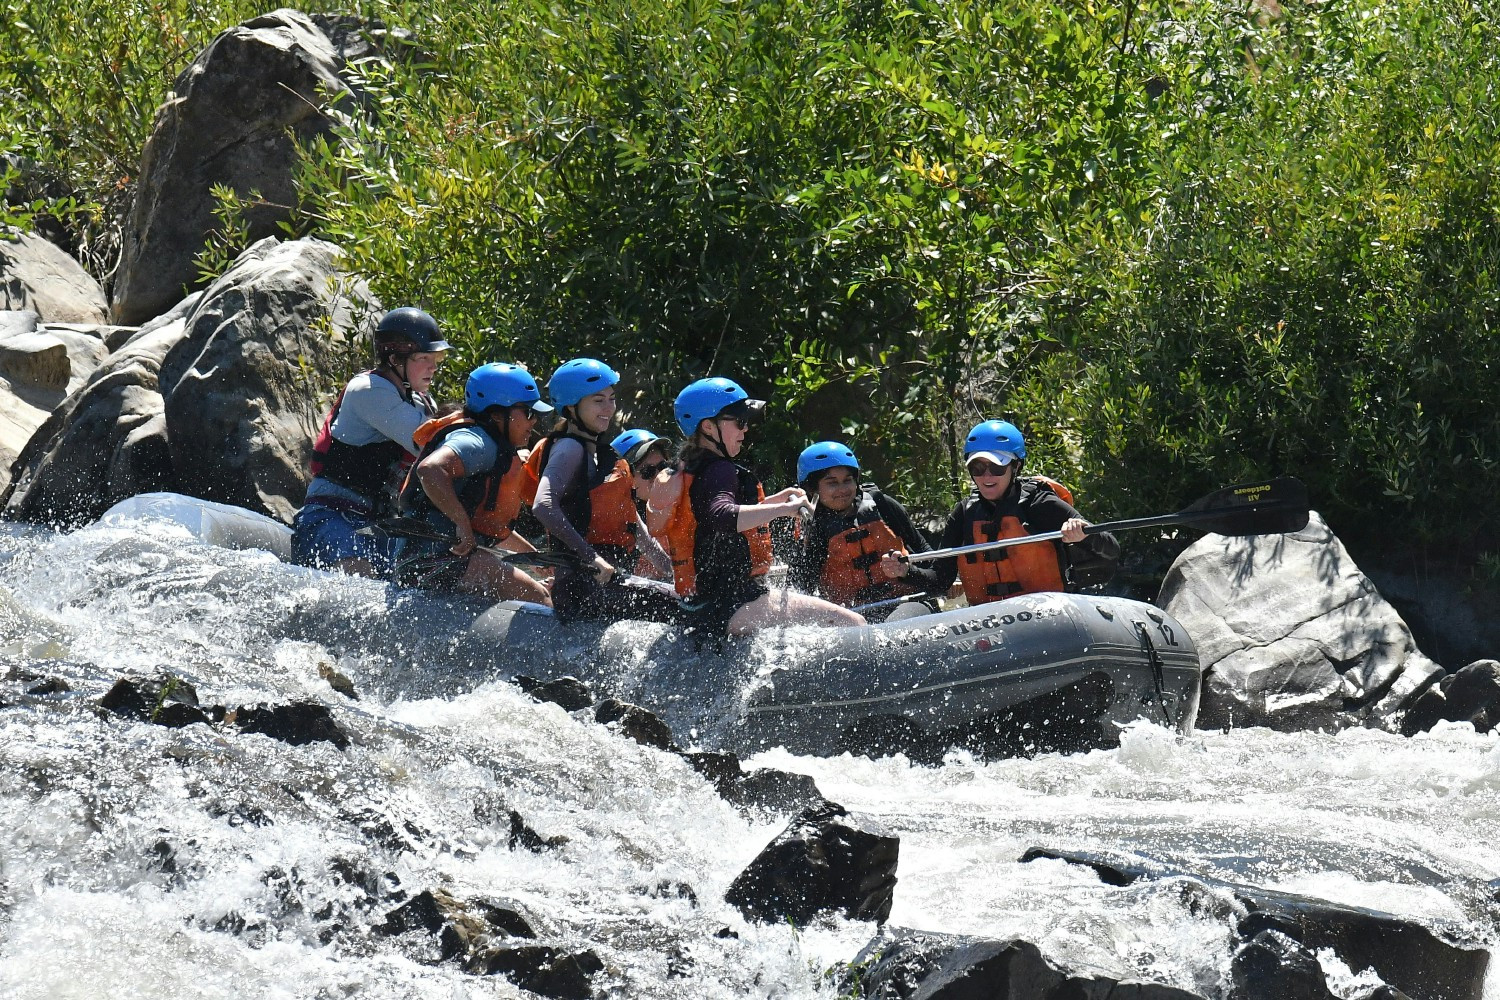 West Yost teammates and their families enjoying river rafting in Northern California at an annual Summer Social